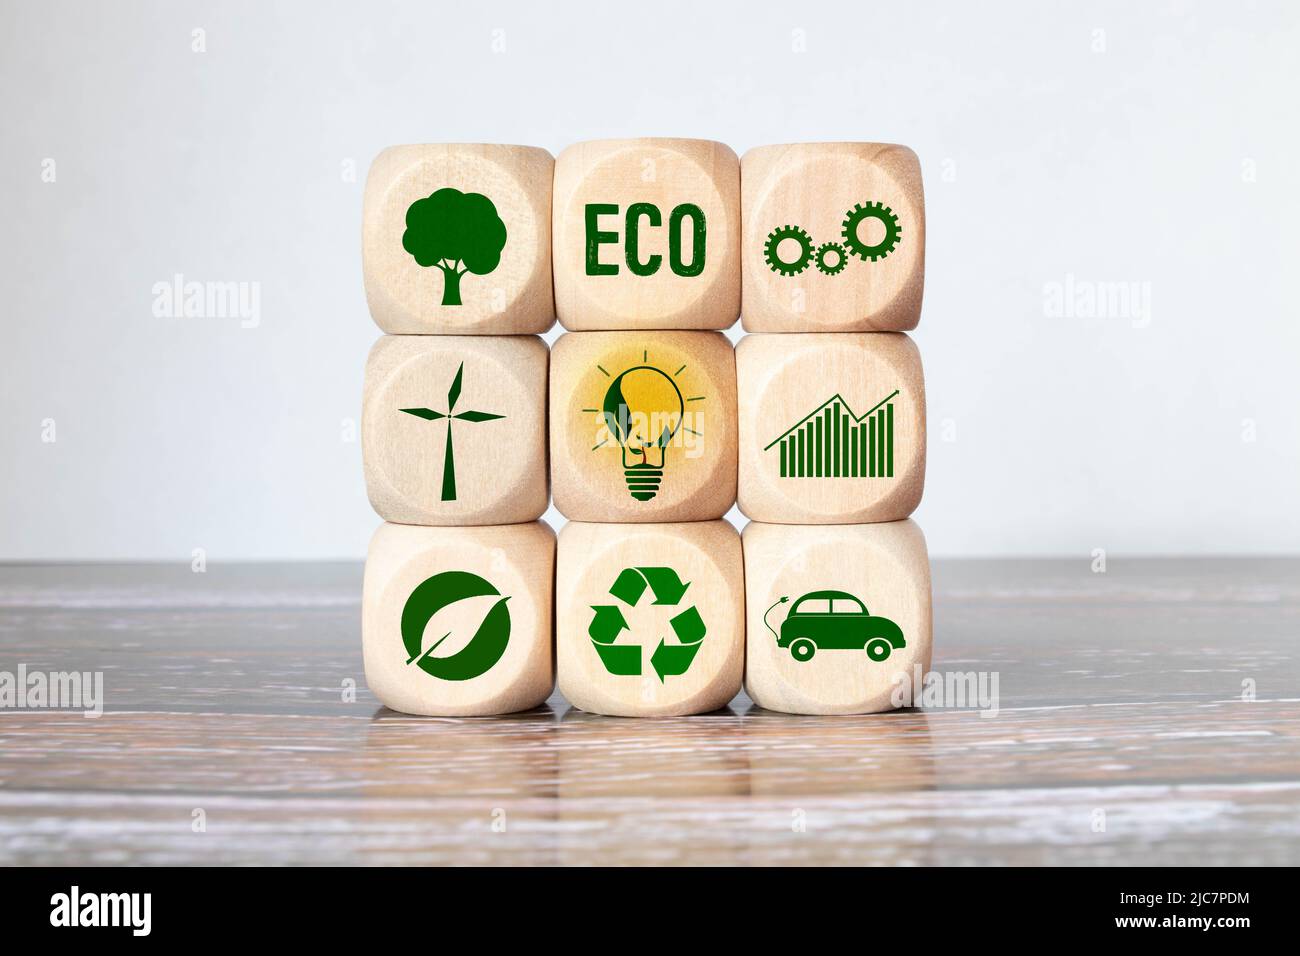 Carbon ecological footprint symbols on wooden cube with eco friendly icon. Stock Photo